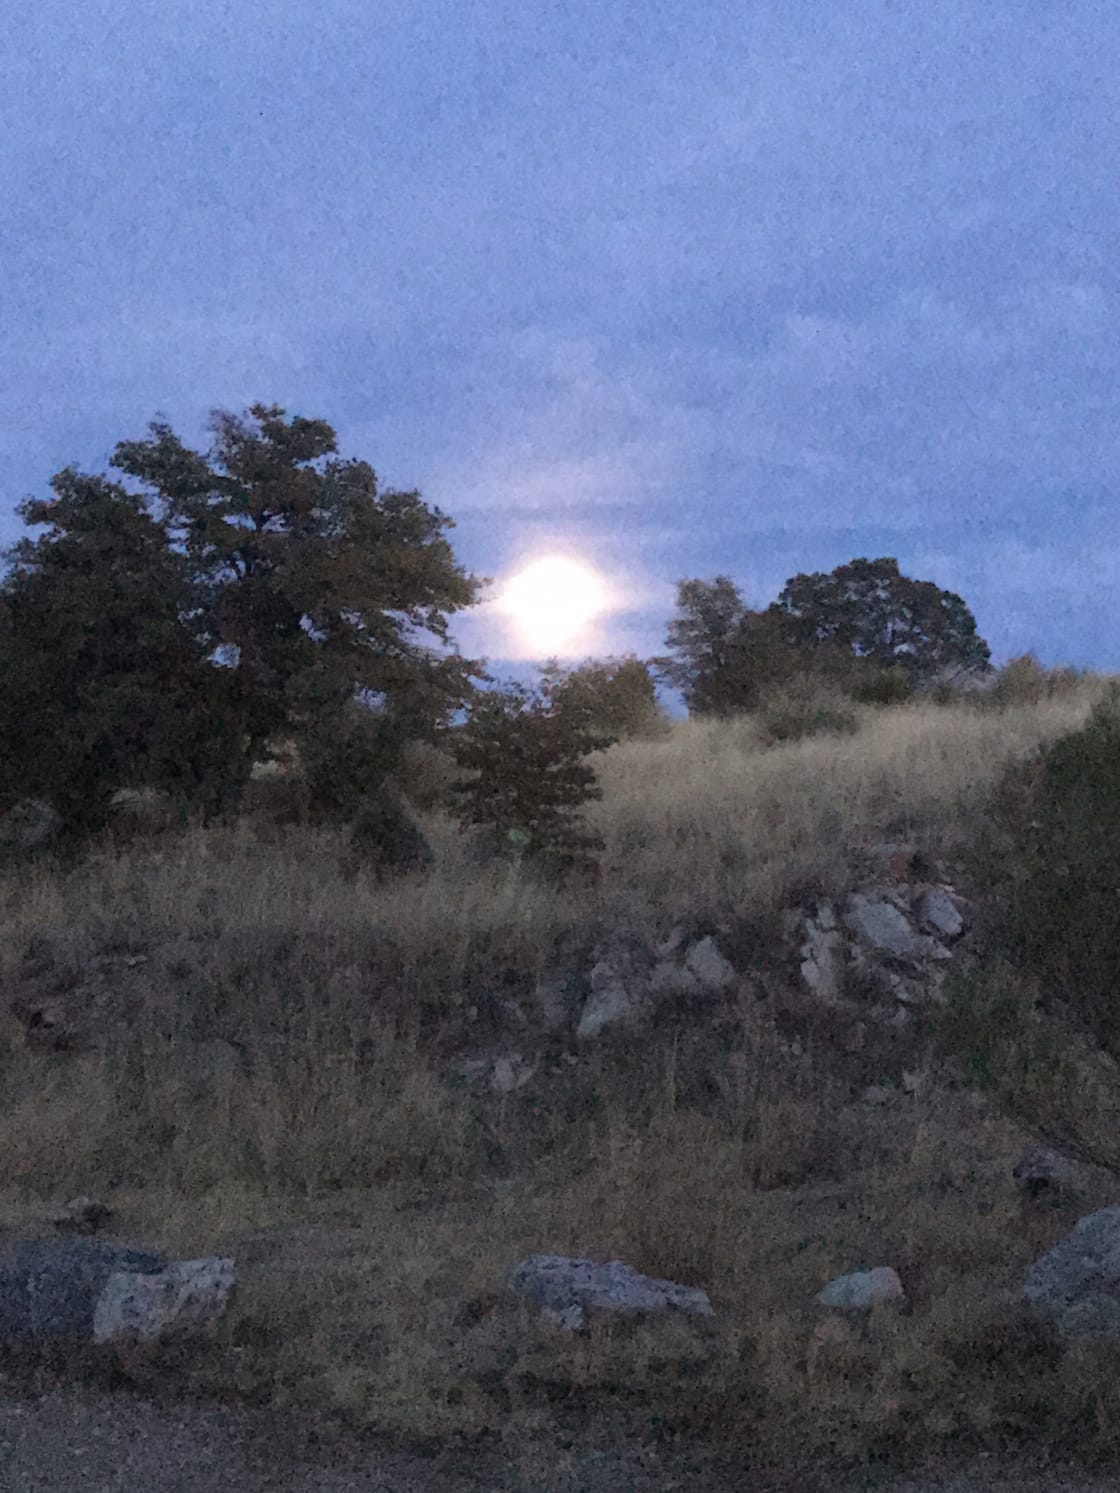 Horrible photo, but I forgot to take more. This was the supermoon rising over the campground. The sunrises were just ad stunning. 